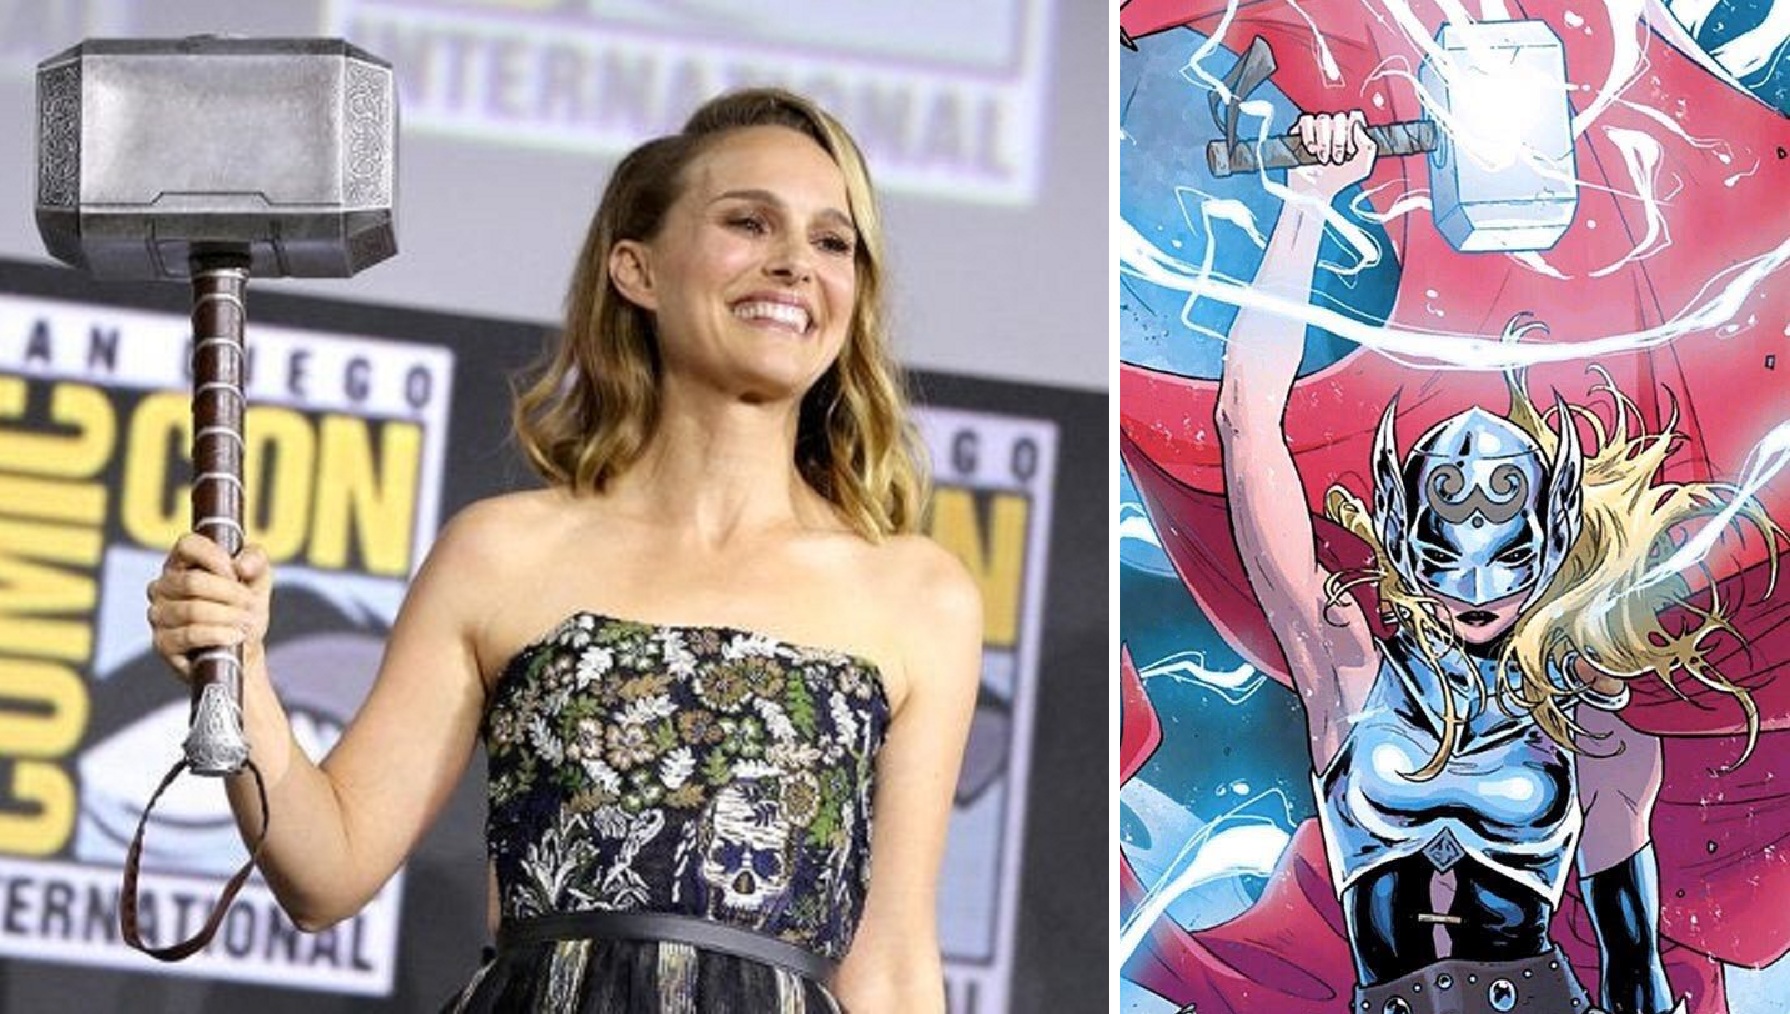 Natalie Portman Set To Play Female Thor in Upcoming Sequel Of The Marvel Franchise!